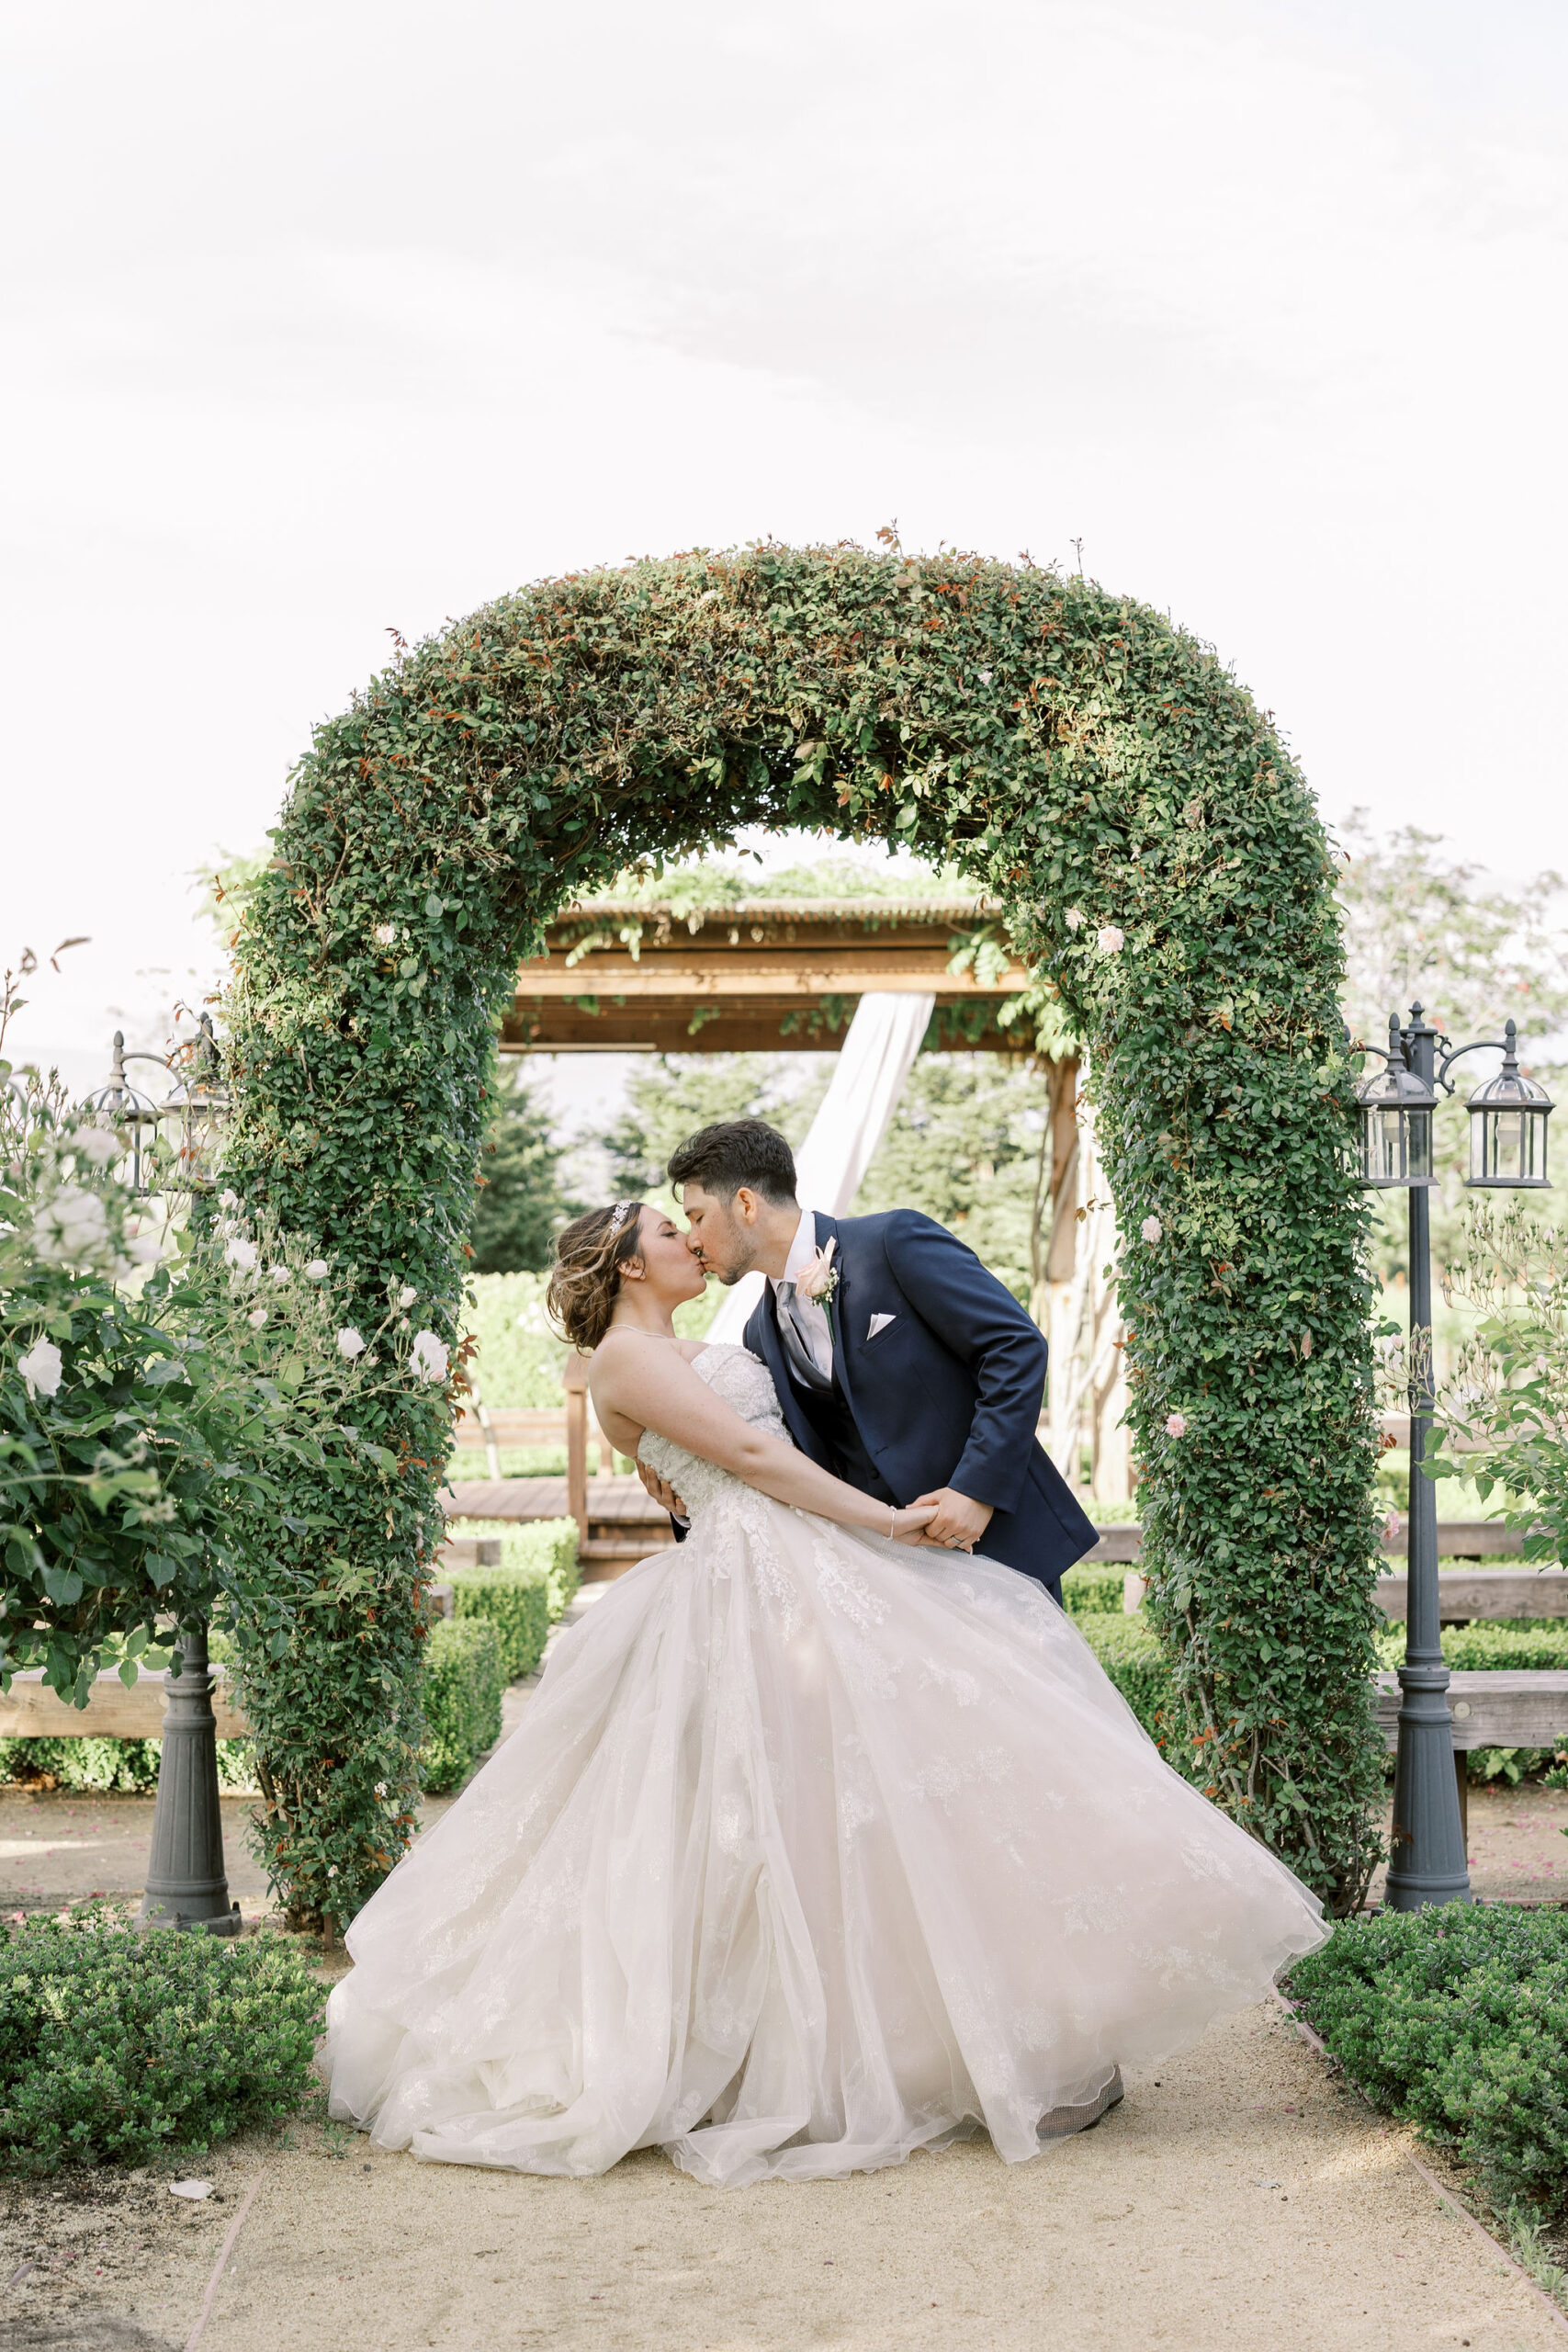 Bay Area wedding photographer photographs bride and groom kissing under a arch made from bushes as the bride leans back